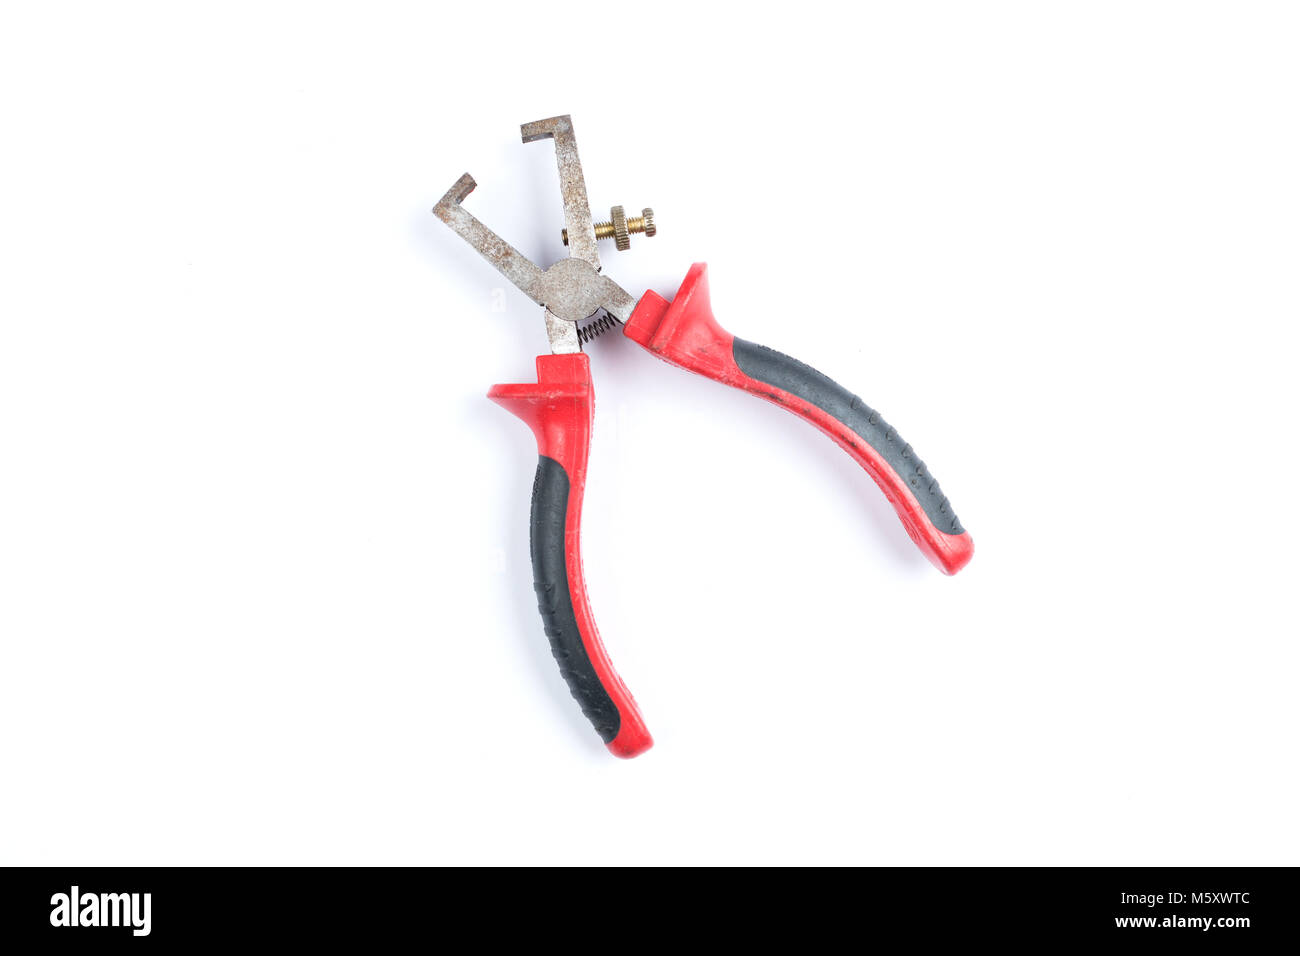 Pliers for removing isolation from electrical cables with red handles isolated on a white background. Electrician tool Stock Photo